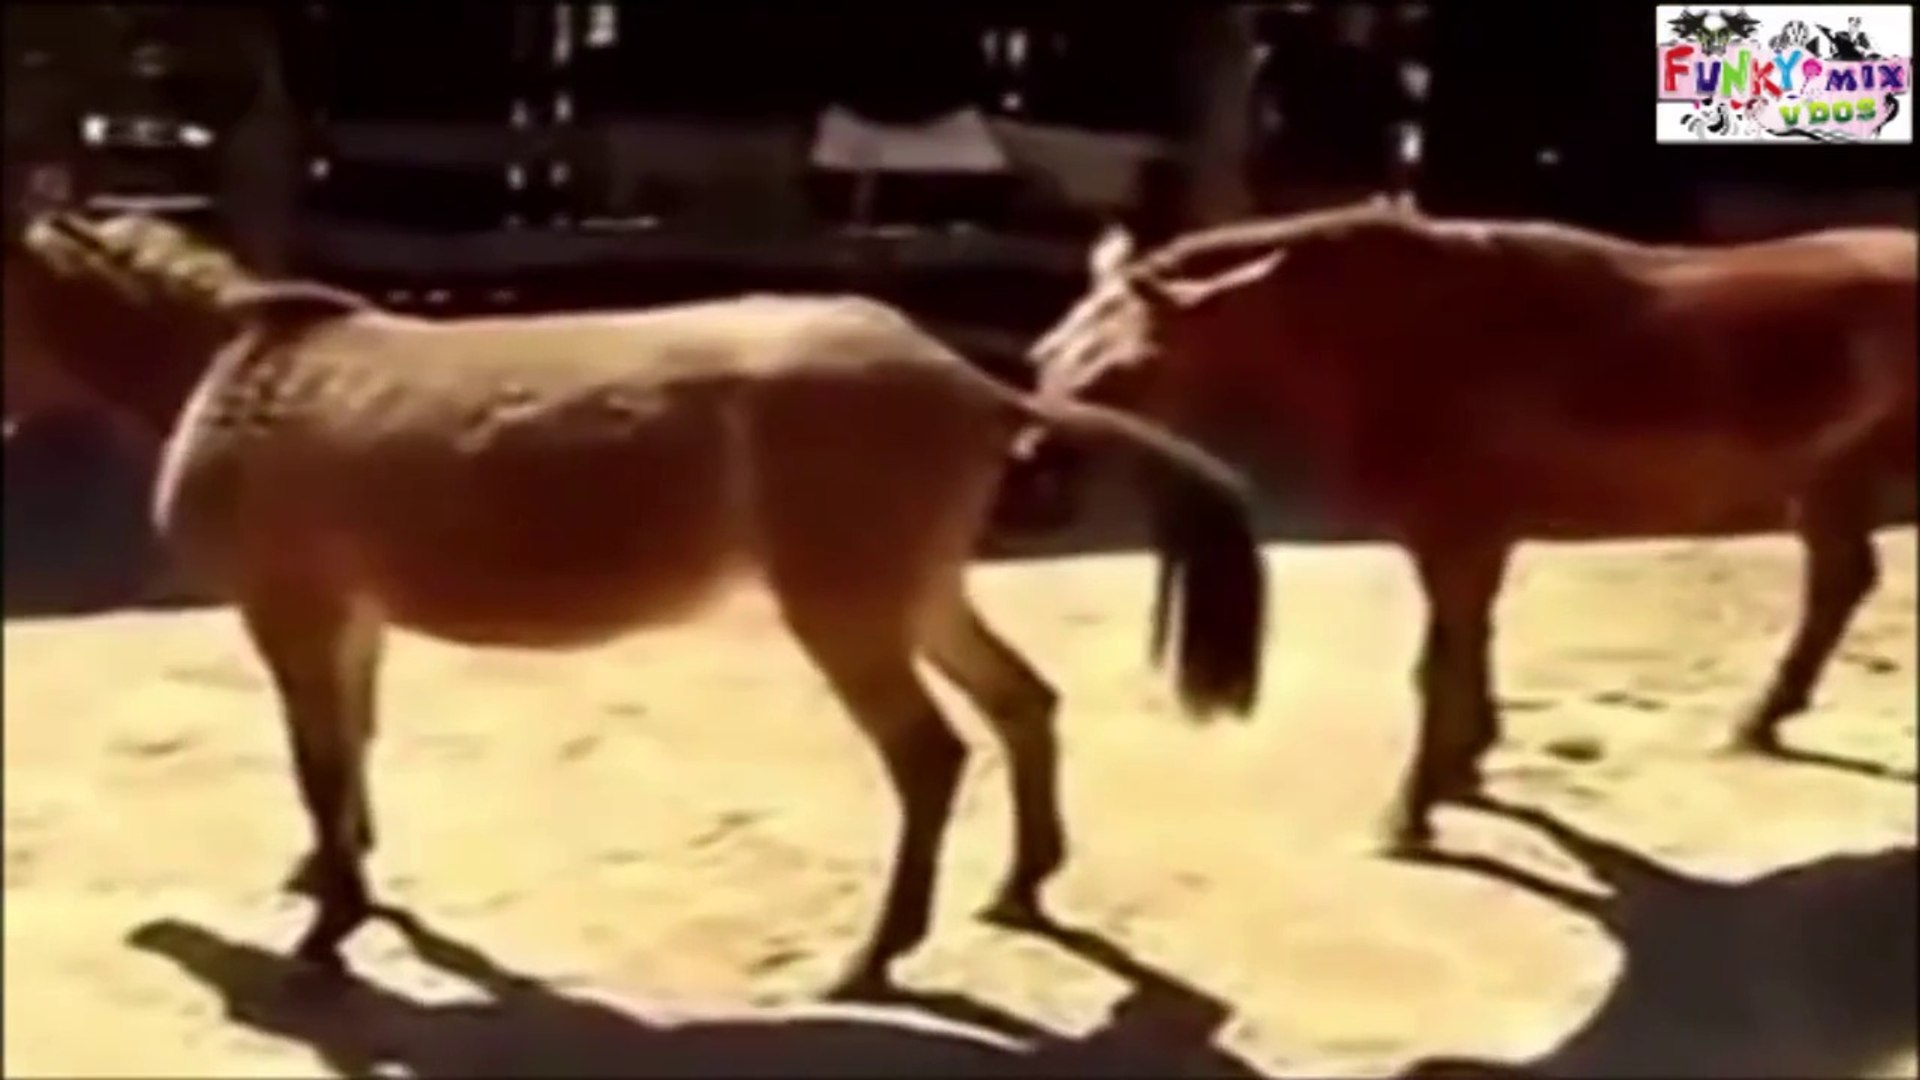 Horse Sex Porn Intercores - Zebra Mule Horse Donkey In The Wild Mating WEIRD SEX (Intercourse) Must See  - Dailymotion Video